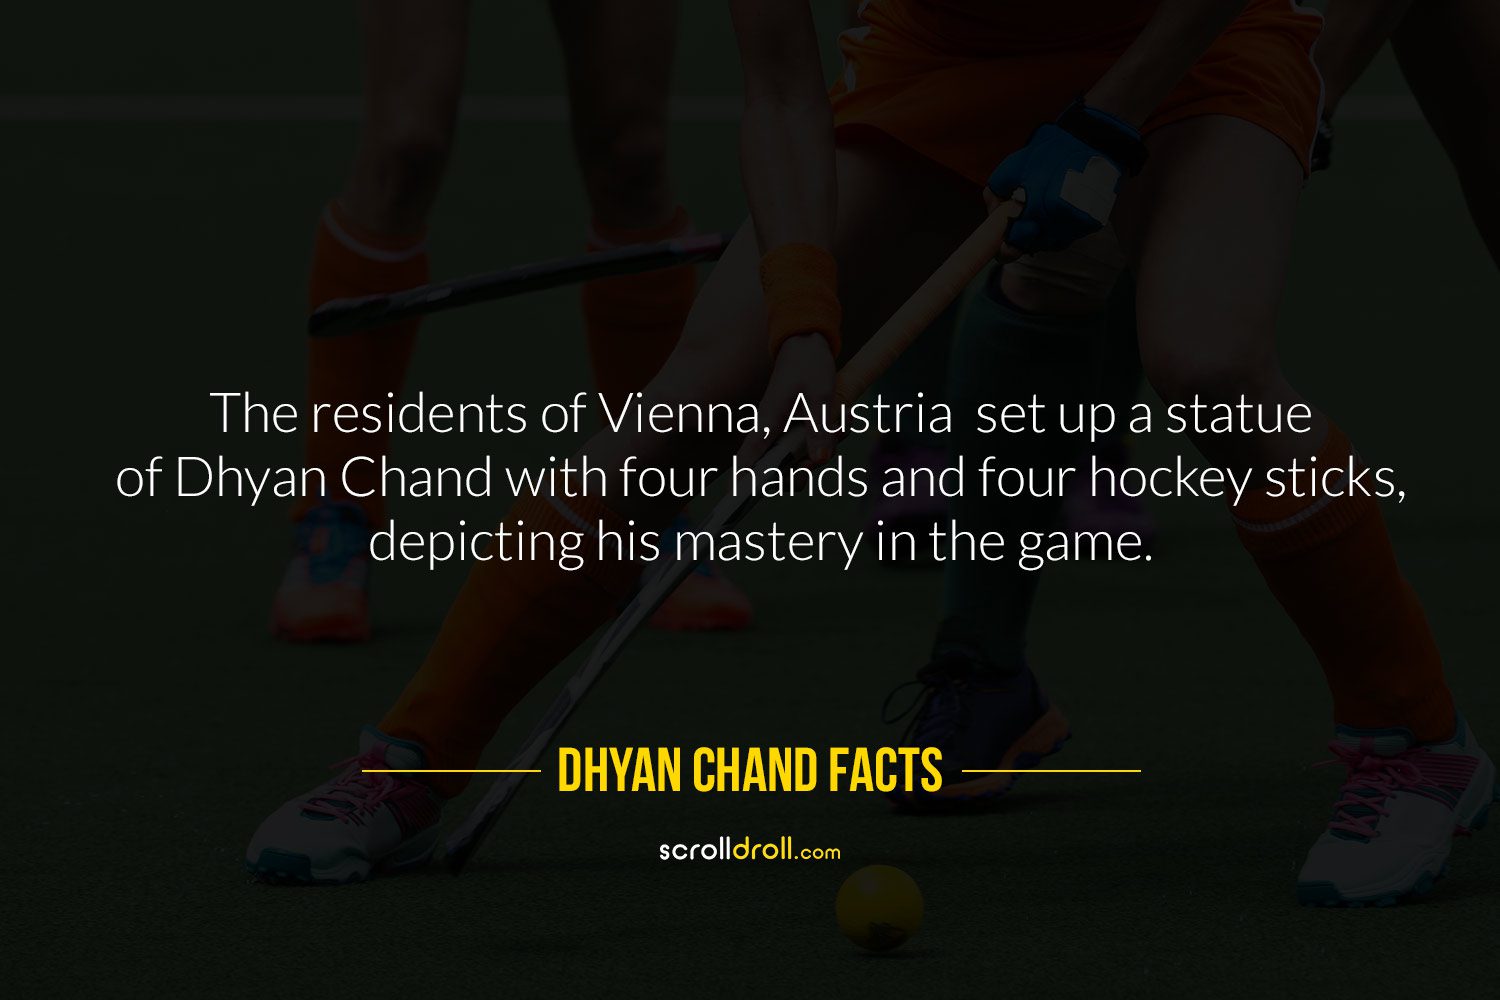 Dhyanchand-Facts-7